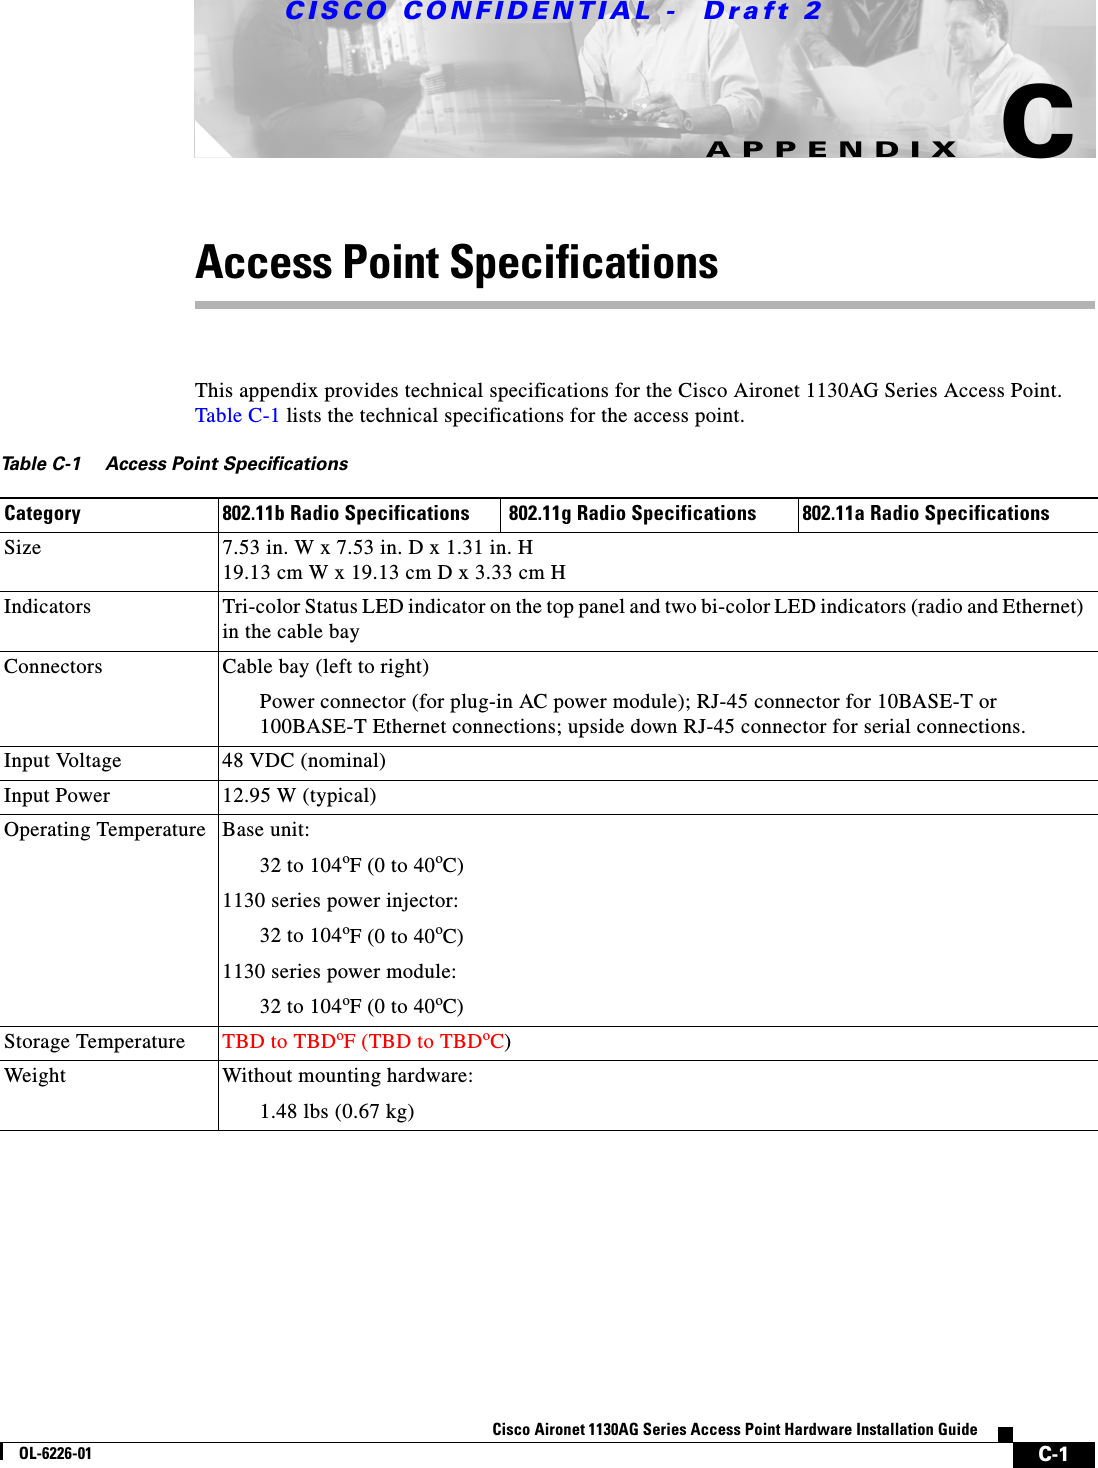  CISCO CONFIDENTIAL -  Draft 2C-1Cisco Aironet 1130AG Series Access Point Hardware Installation GuideOL-6226-01APPENDIXCAccess Point Specifications This appendix provides technical specifications for the Cisco Aironet 1130AG Series Access Point. Table C-1 lists the technical specifications for the access point. Table C-1 Access Point SpecificationsCategory 802.11b Radio Specifications  802.11g Radio Specifications 802.11a Radio SpecificationsSize 7.53 in. W x 7.53 in. D x 1.31 in. H19.13 cm W x 19.13 cm D x 3.33 cm H Indicators Tri-color Status LED indicator on the top panel and two bi-color LED indicators (radio and Ethernet) in the cable bayConnectors Cable bay (left to right)Power connector (for plug-in AC power module); RJ-45 connector for 10BASE-T or 100BASE-T Ethernet connections; upside down RJ-45 connector for serial connections.Input Voltage  48 VDC (nominal)Input Power 12.95 W (typical)Operating Temperature Base unit:32 to 104oF (0 to 40oC) 1130 series power injector:32 to 104oF (0 to 40oC)1130 series power module:32 to 104oF (0 to 40oC)Storage Temperature  TBD to TBDoF (TBD to TBDoC) Weight Without mounting hardware:1.48 lbs (0.67 kg) 